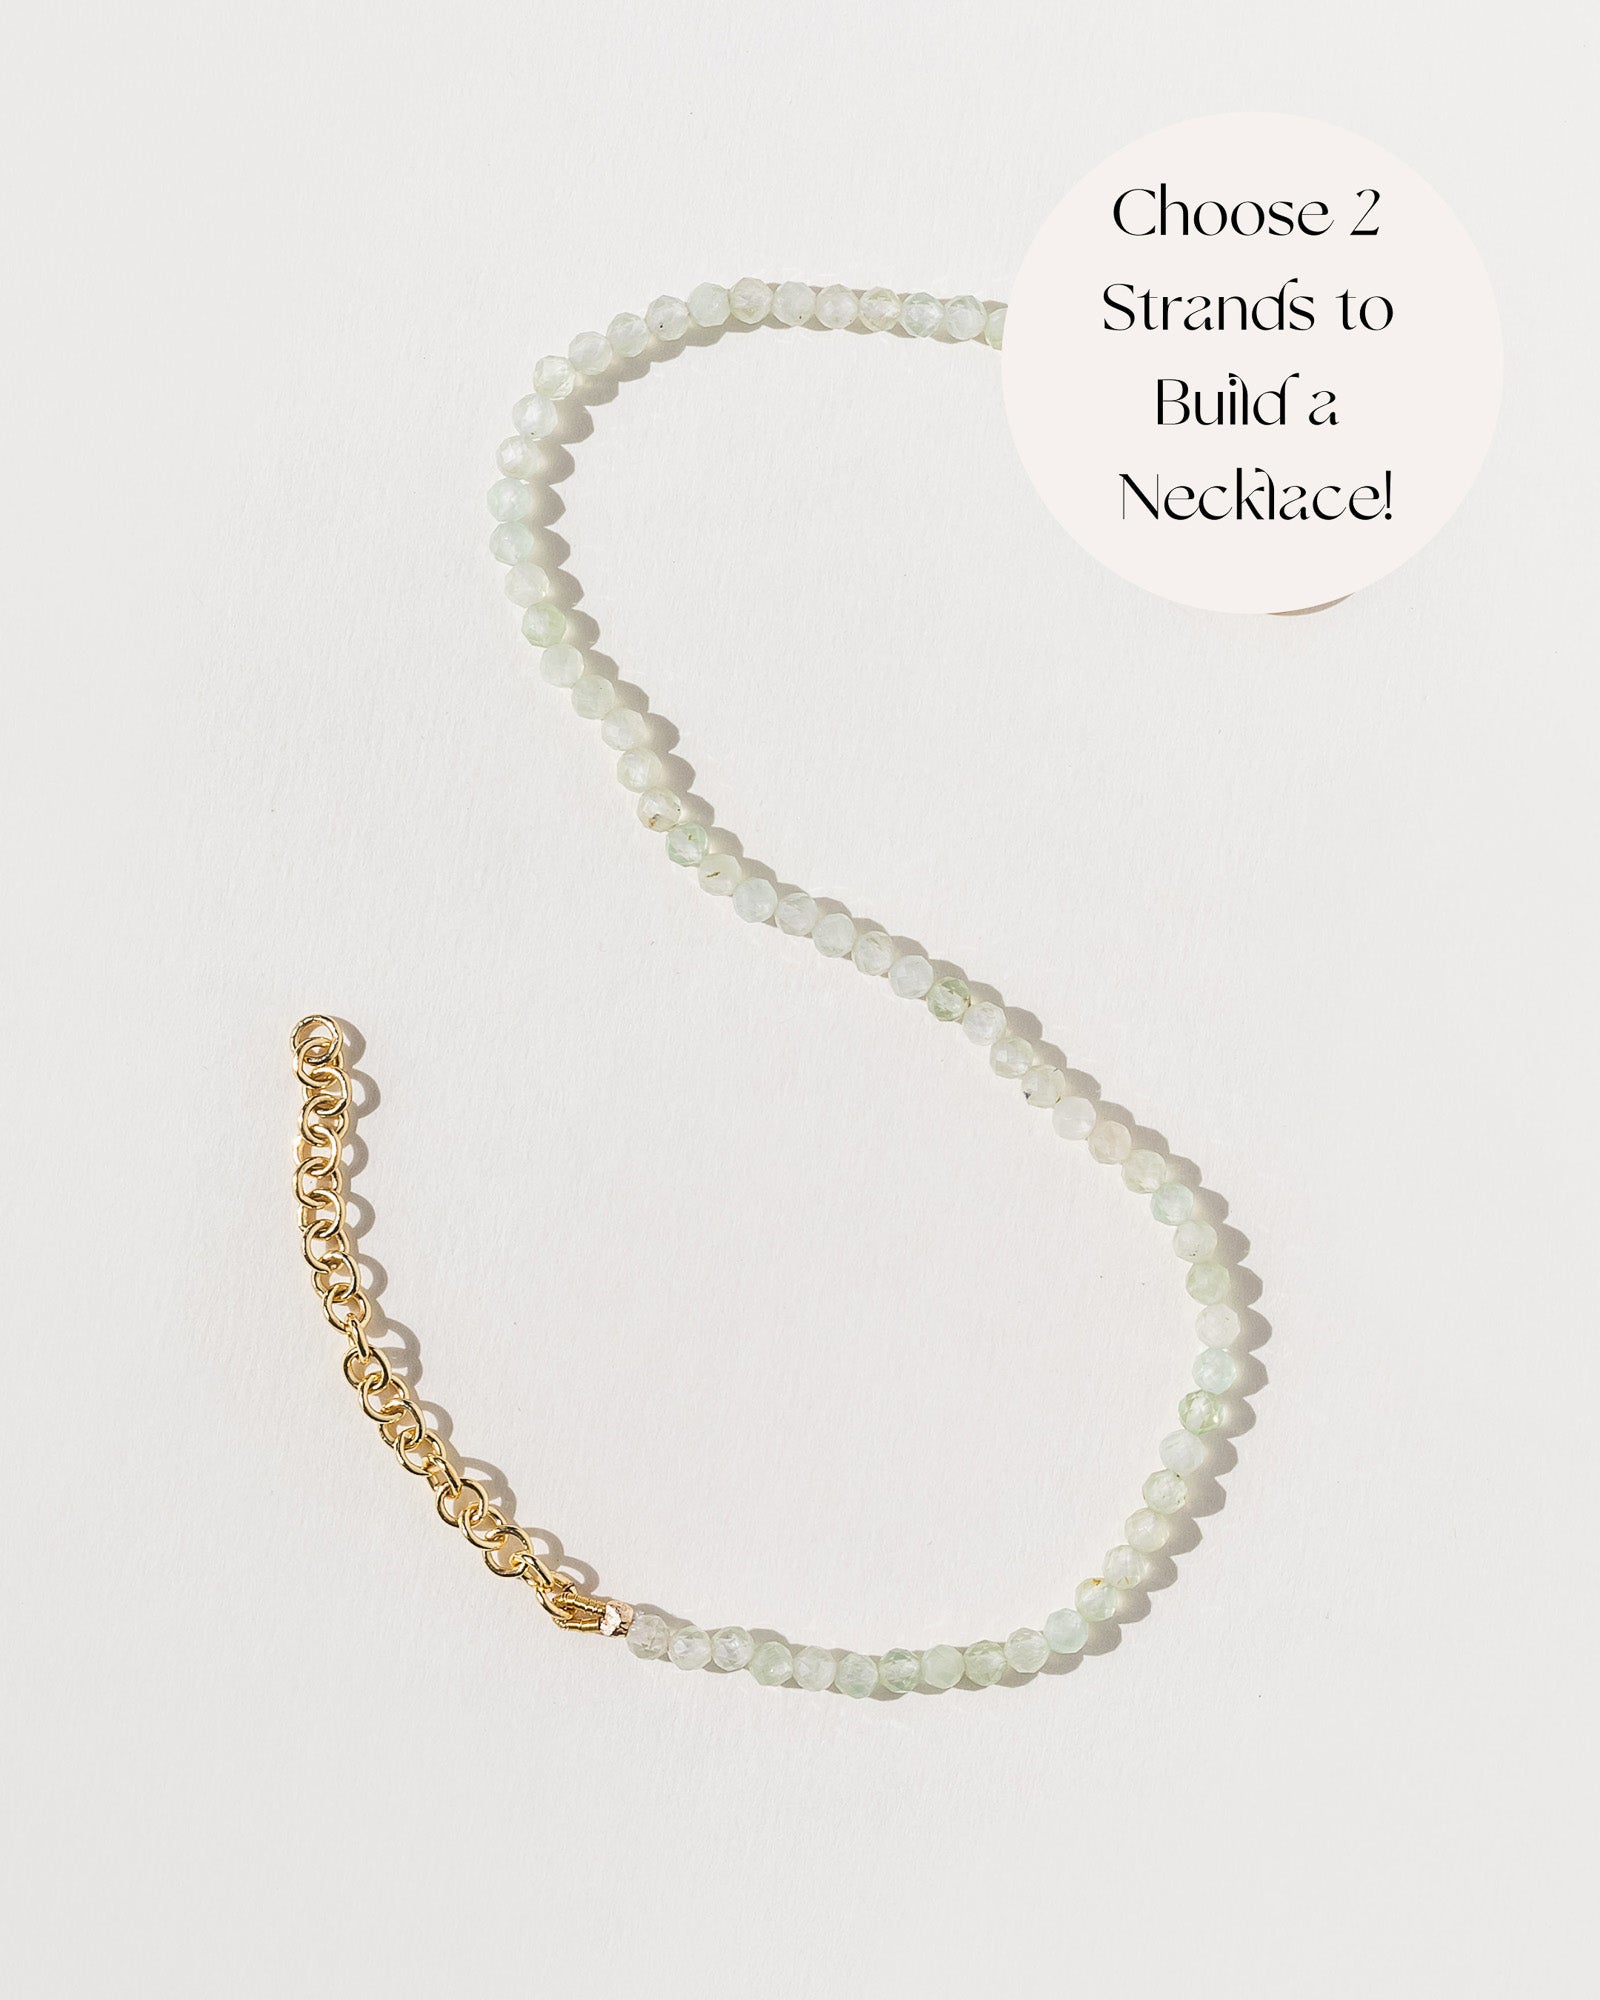 Glacial Charming Necklace Strand - Trades of Hope 